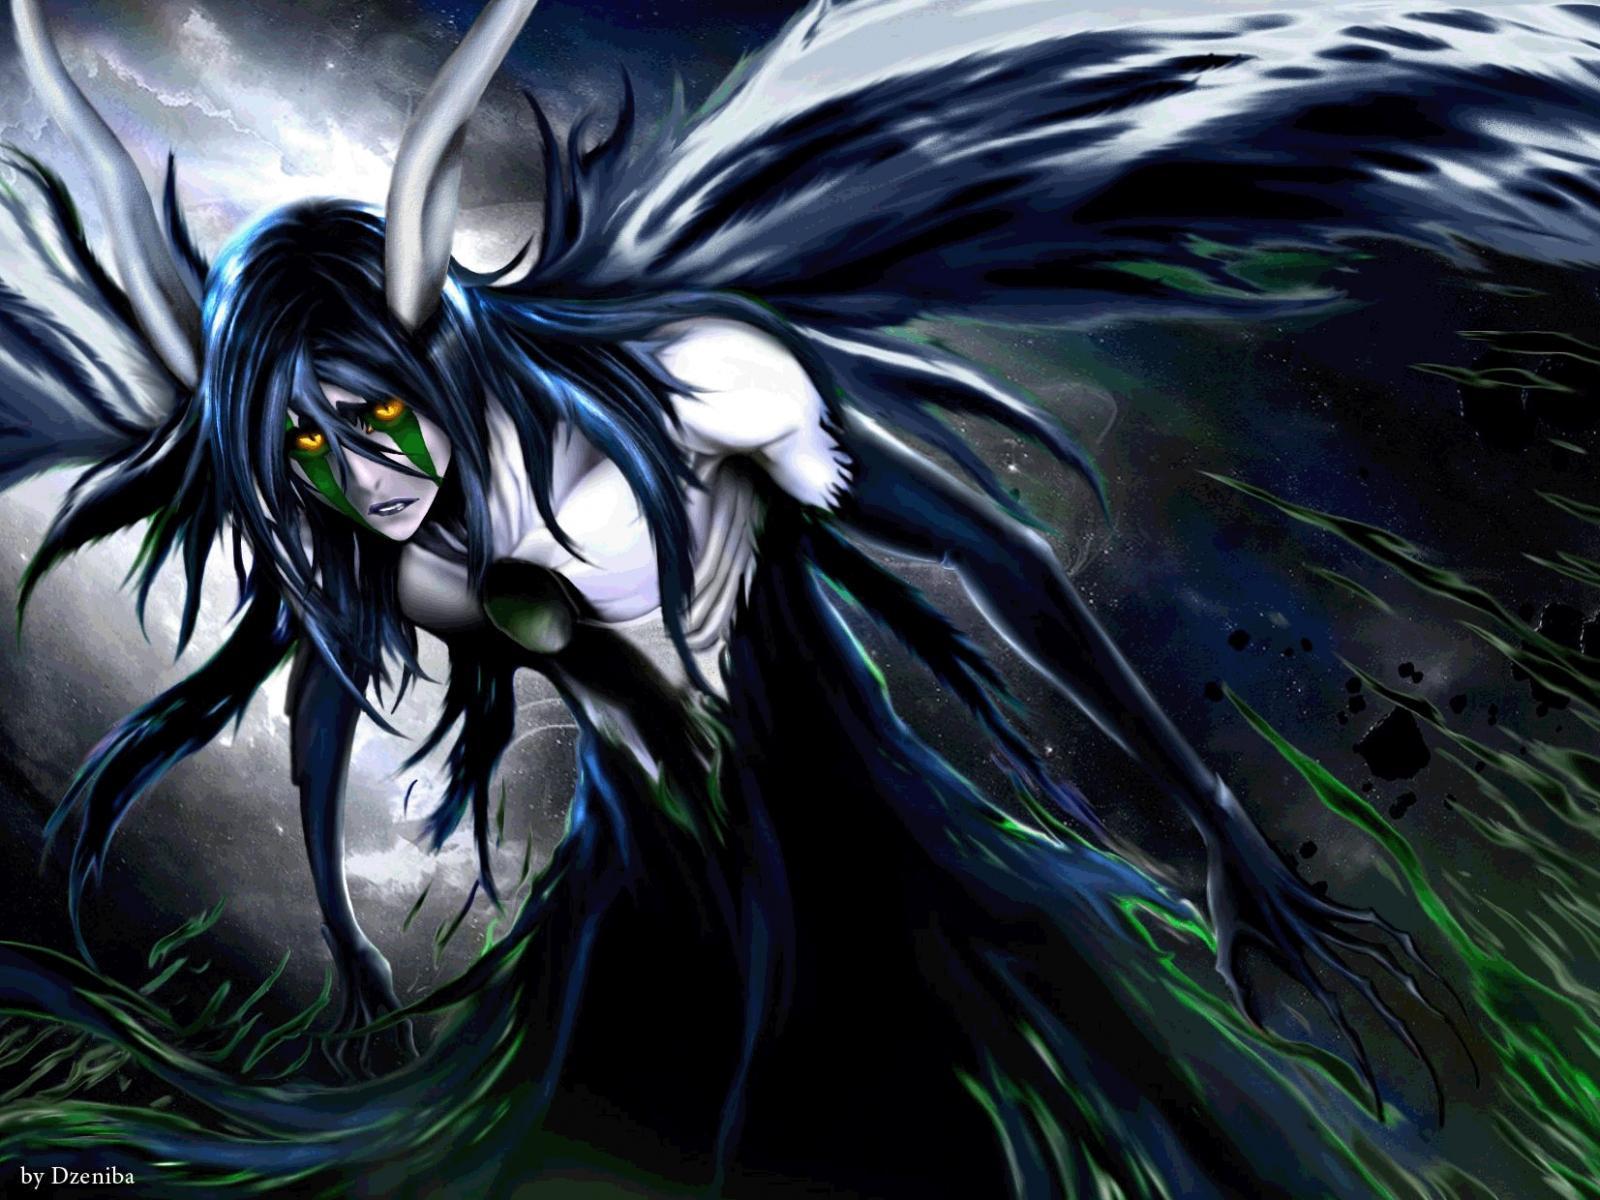 1600 x 1200 · jpeg - Ulquiorra Cifer 9 Fan Arts and Wallpapers | Your daily Anime Wallpaper ...